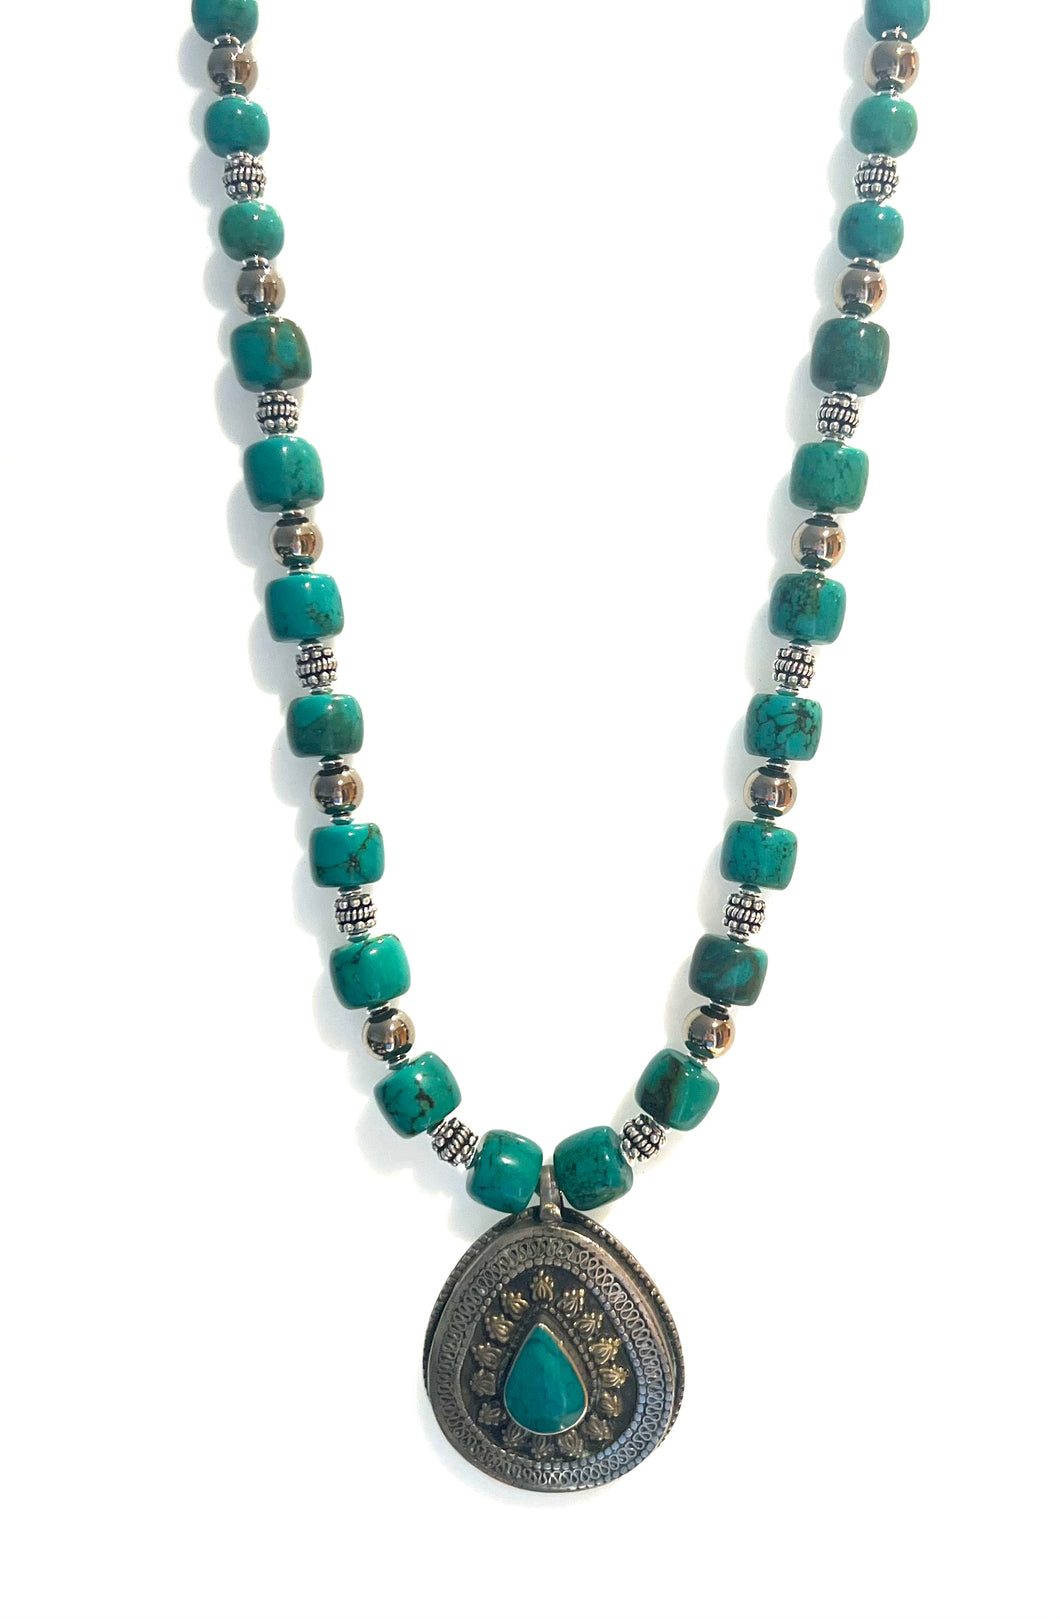 Australian Handmade Turquoise Colour Necklace with Howlite Pyrite Nepalese Pendant inlaid with Turquoise and Sterling Silver